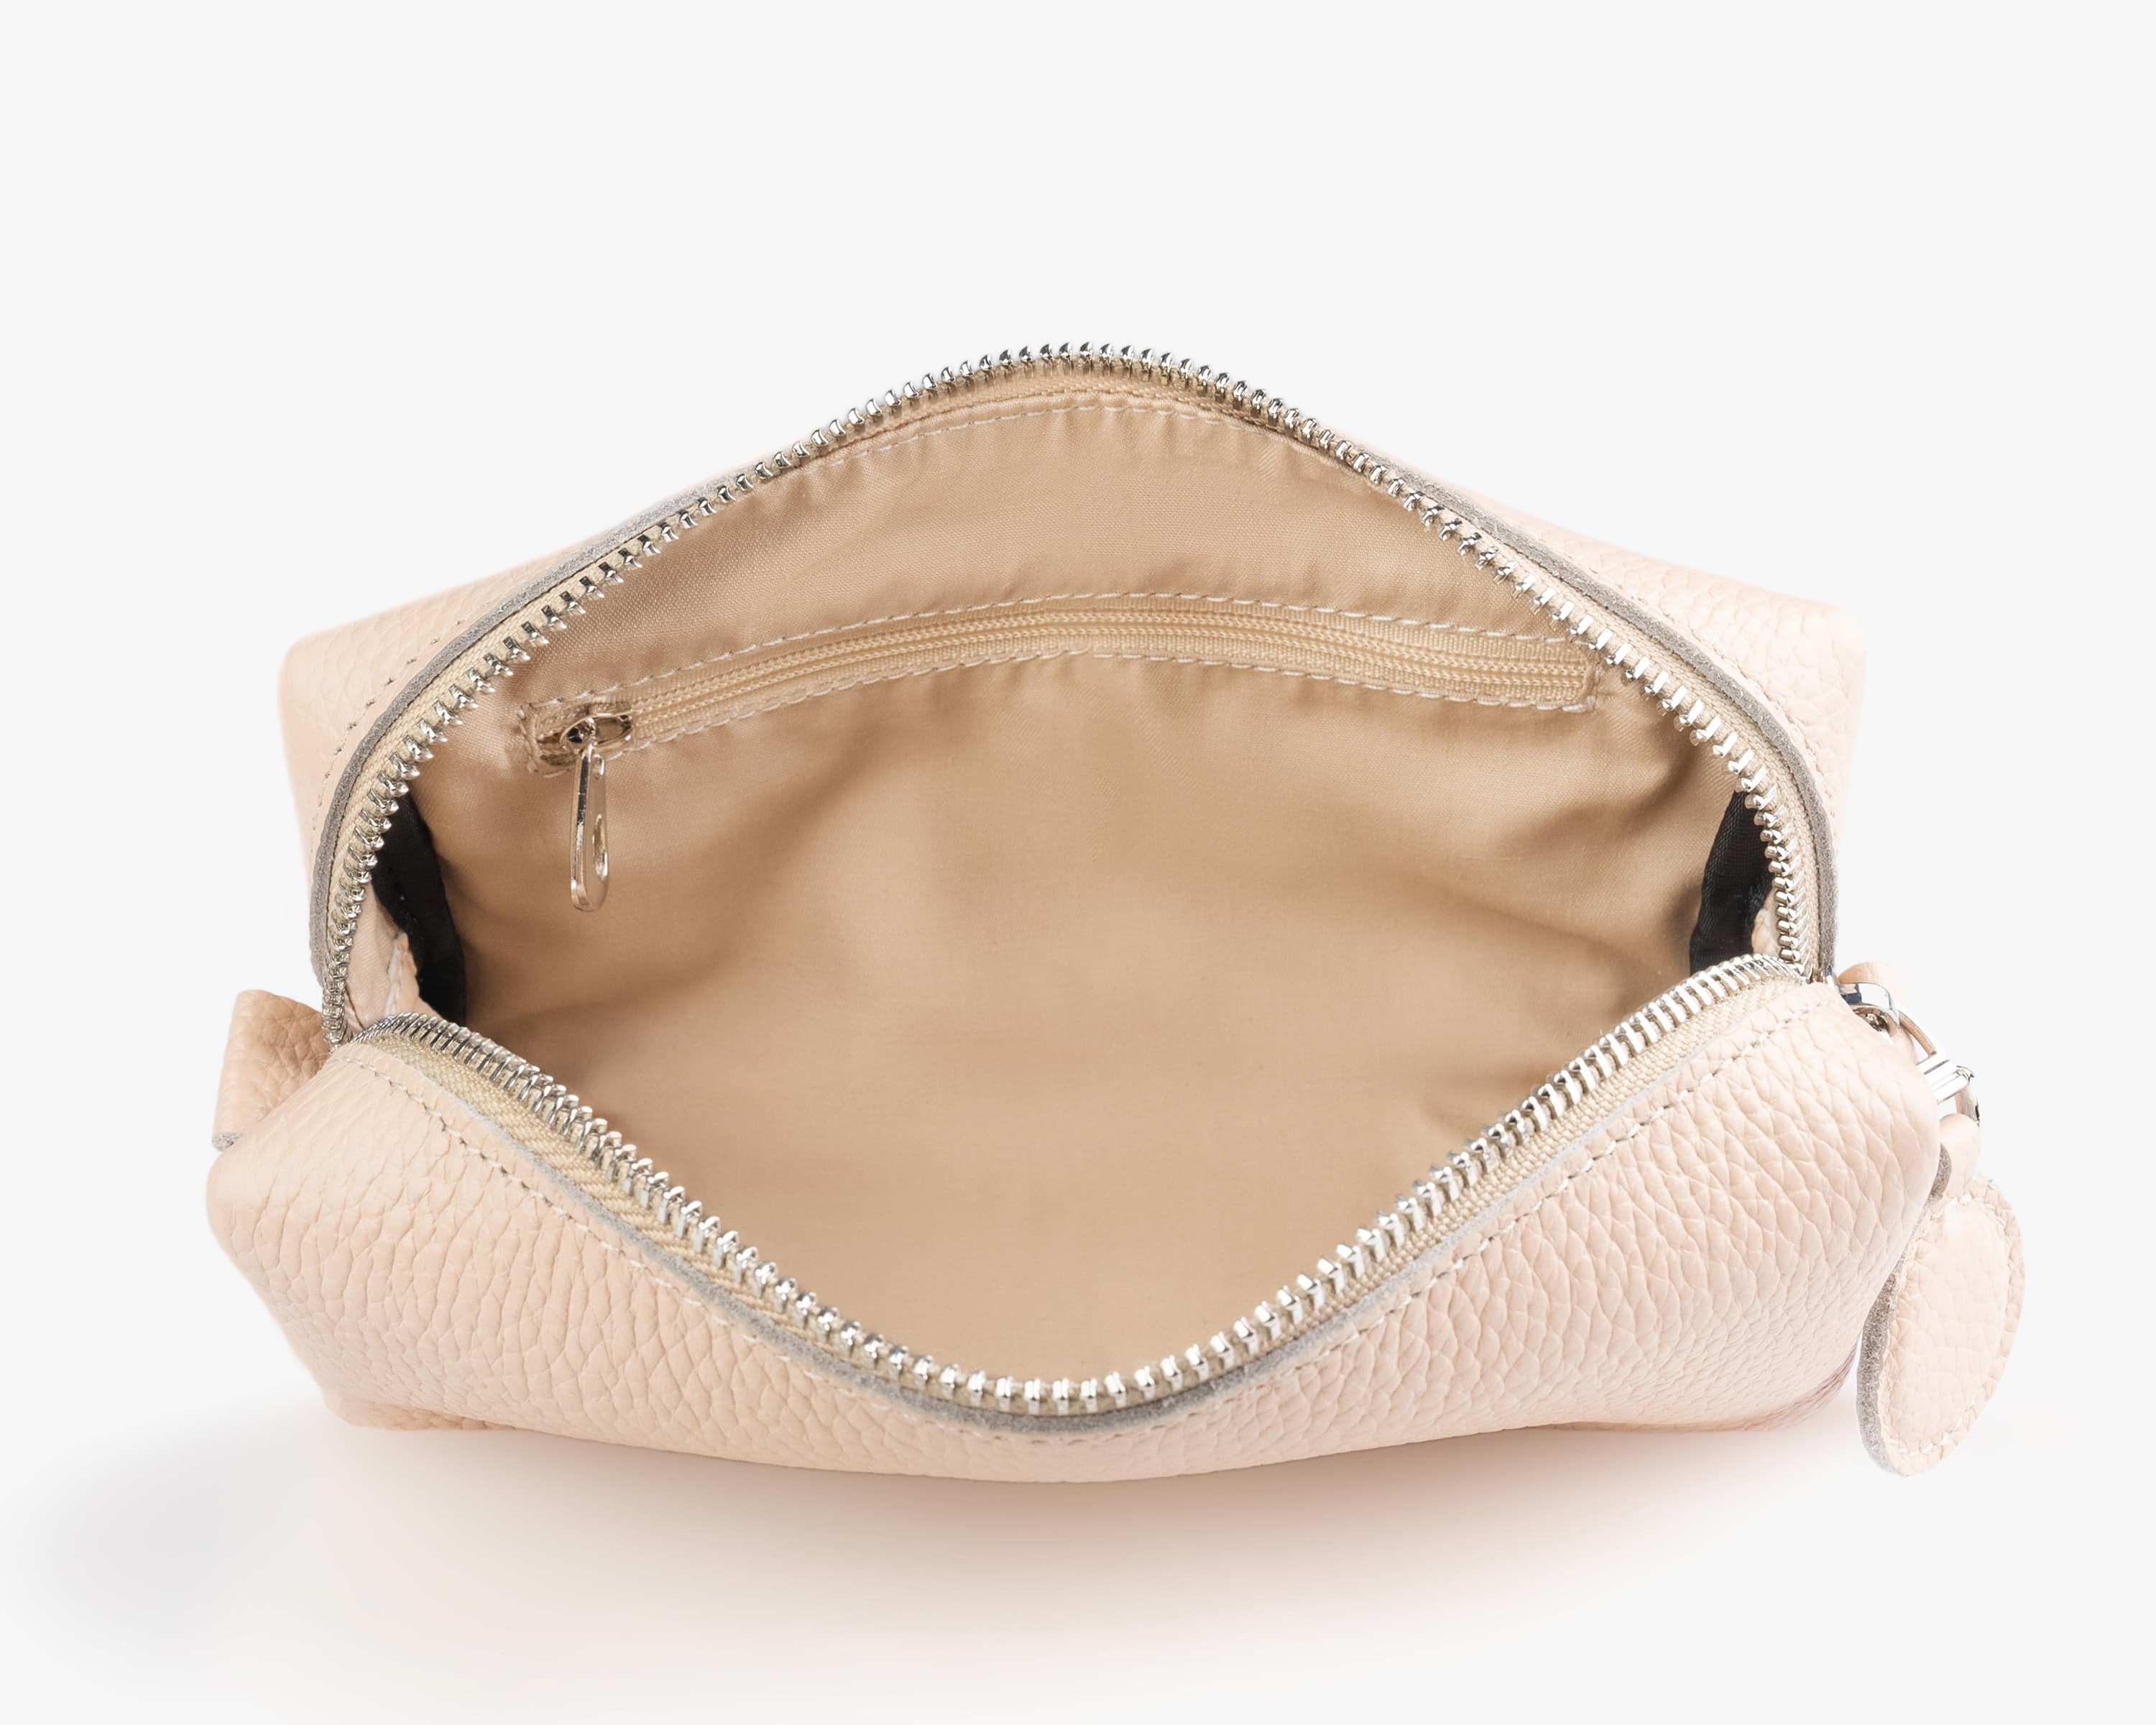 leather makeup bag with lining